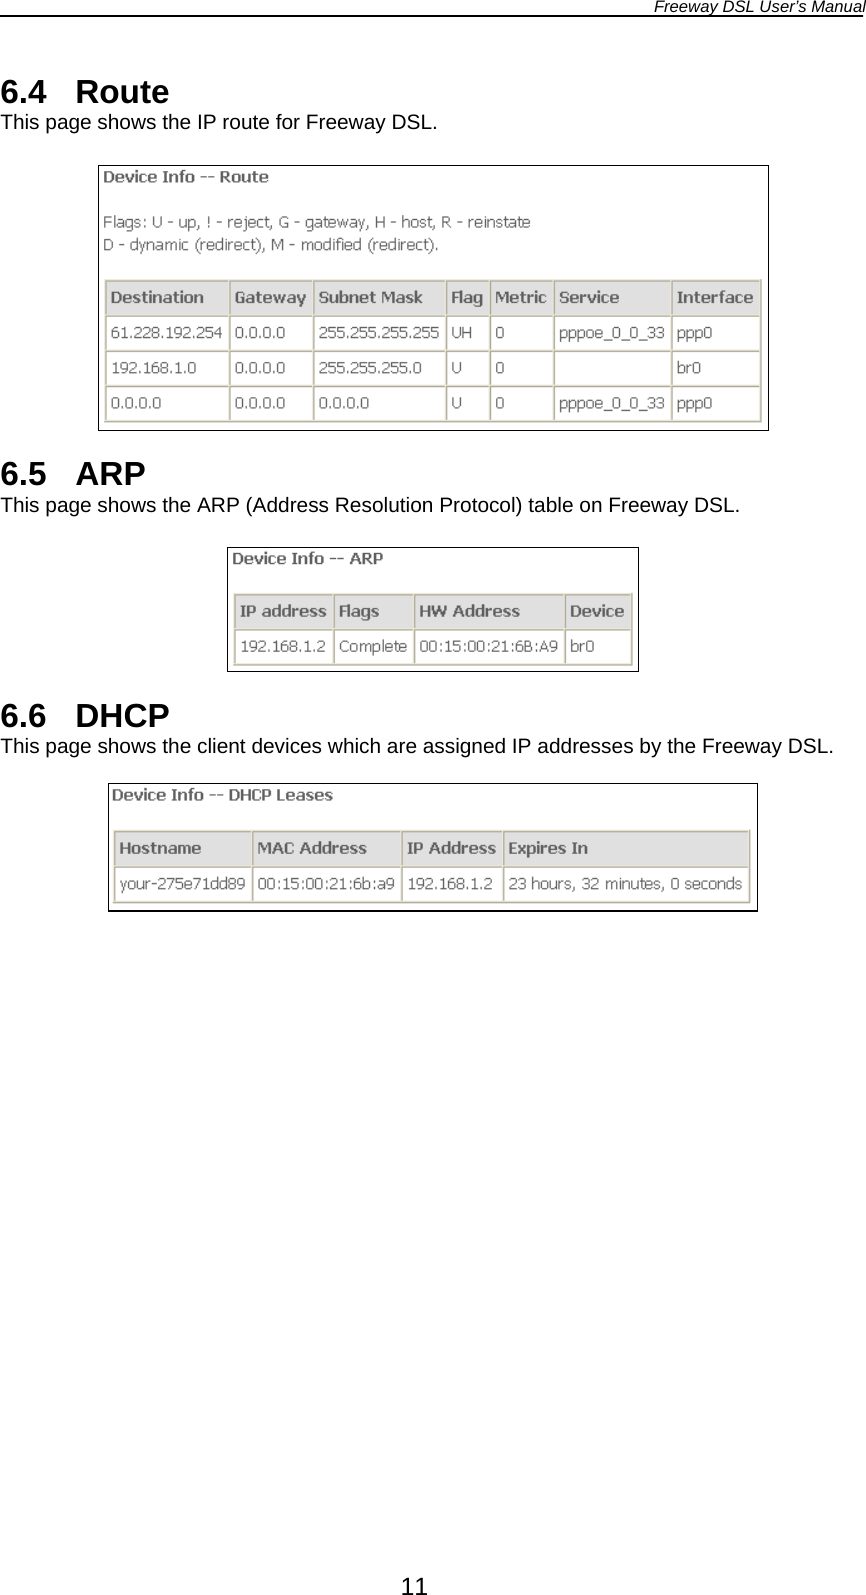 Freeway DSL User’s Manual  11 6.4 Route This page shows the IP route for Freeway DSL.    6.5 ARP This page shows the ARP (Address Resolution Protocol) table on Freeway DSL.    6.6 DHCP This page shows the client devices which are assigned IP addresses by the Freeway DSL.    